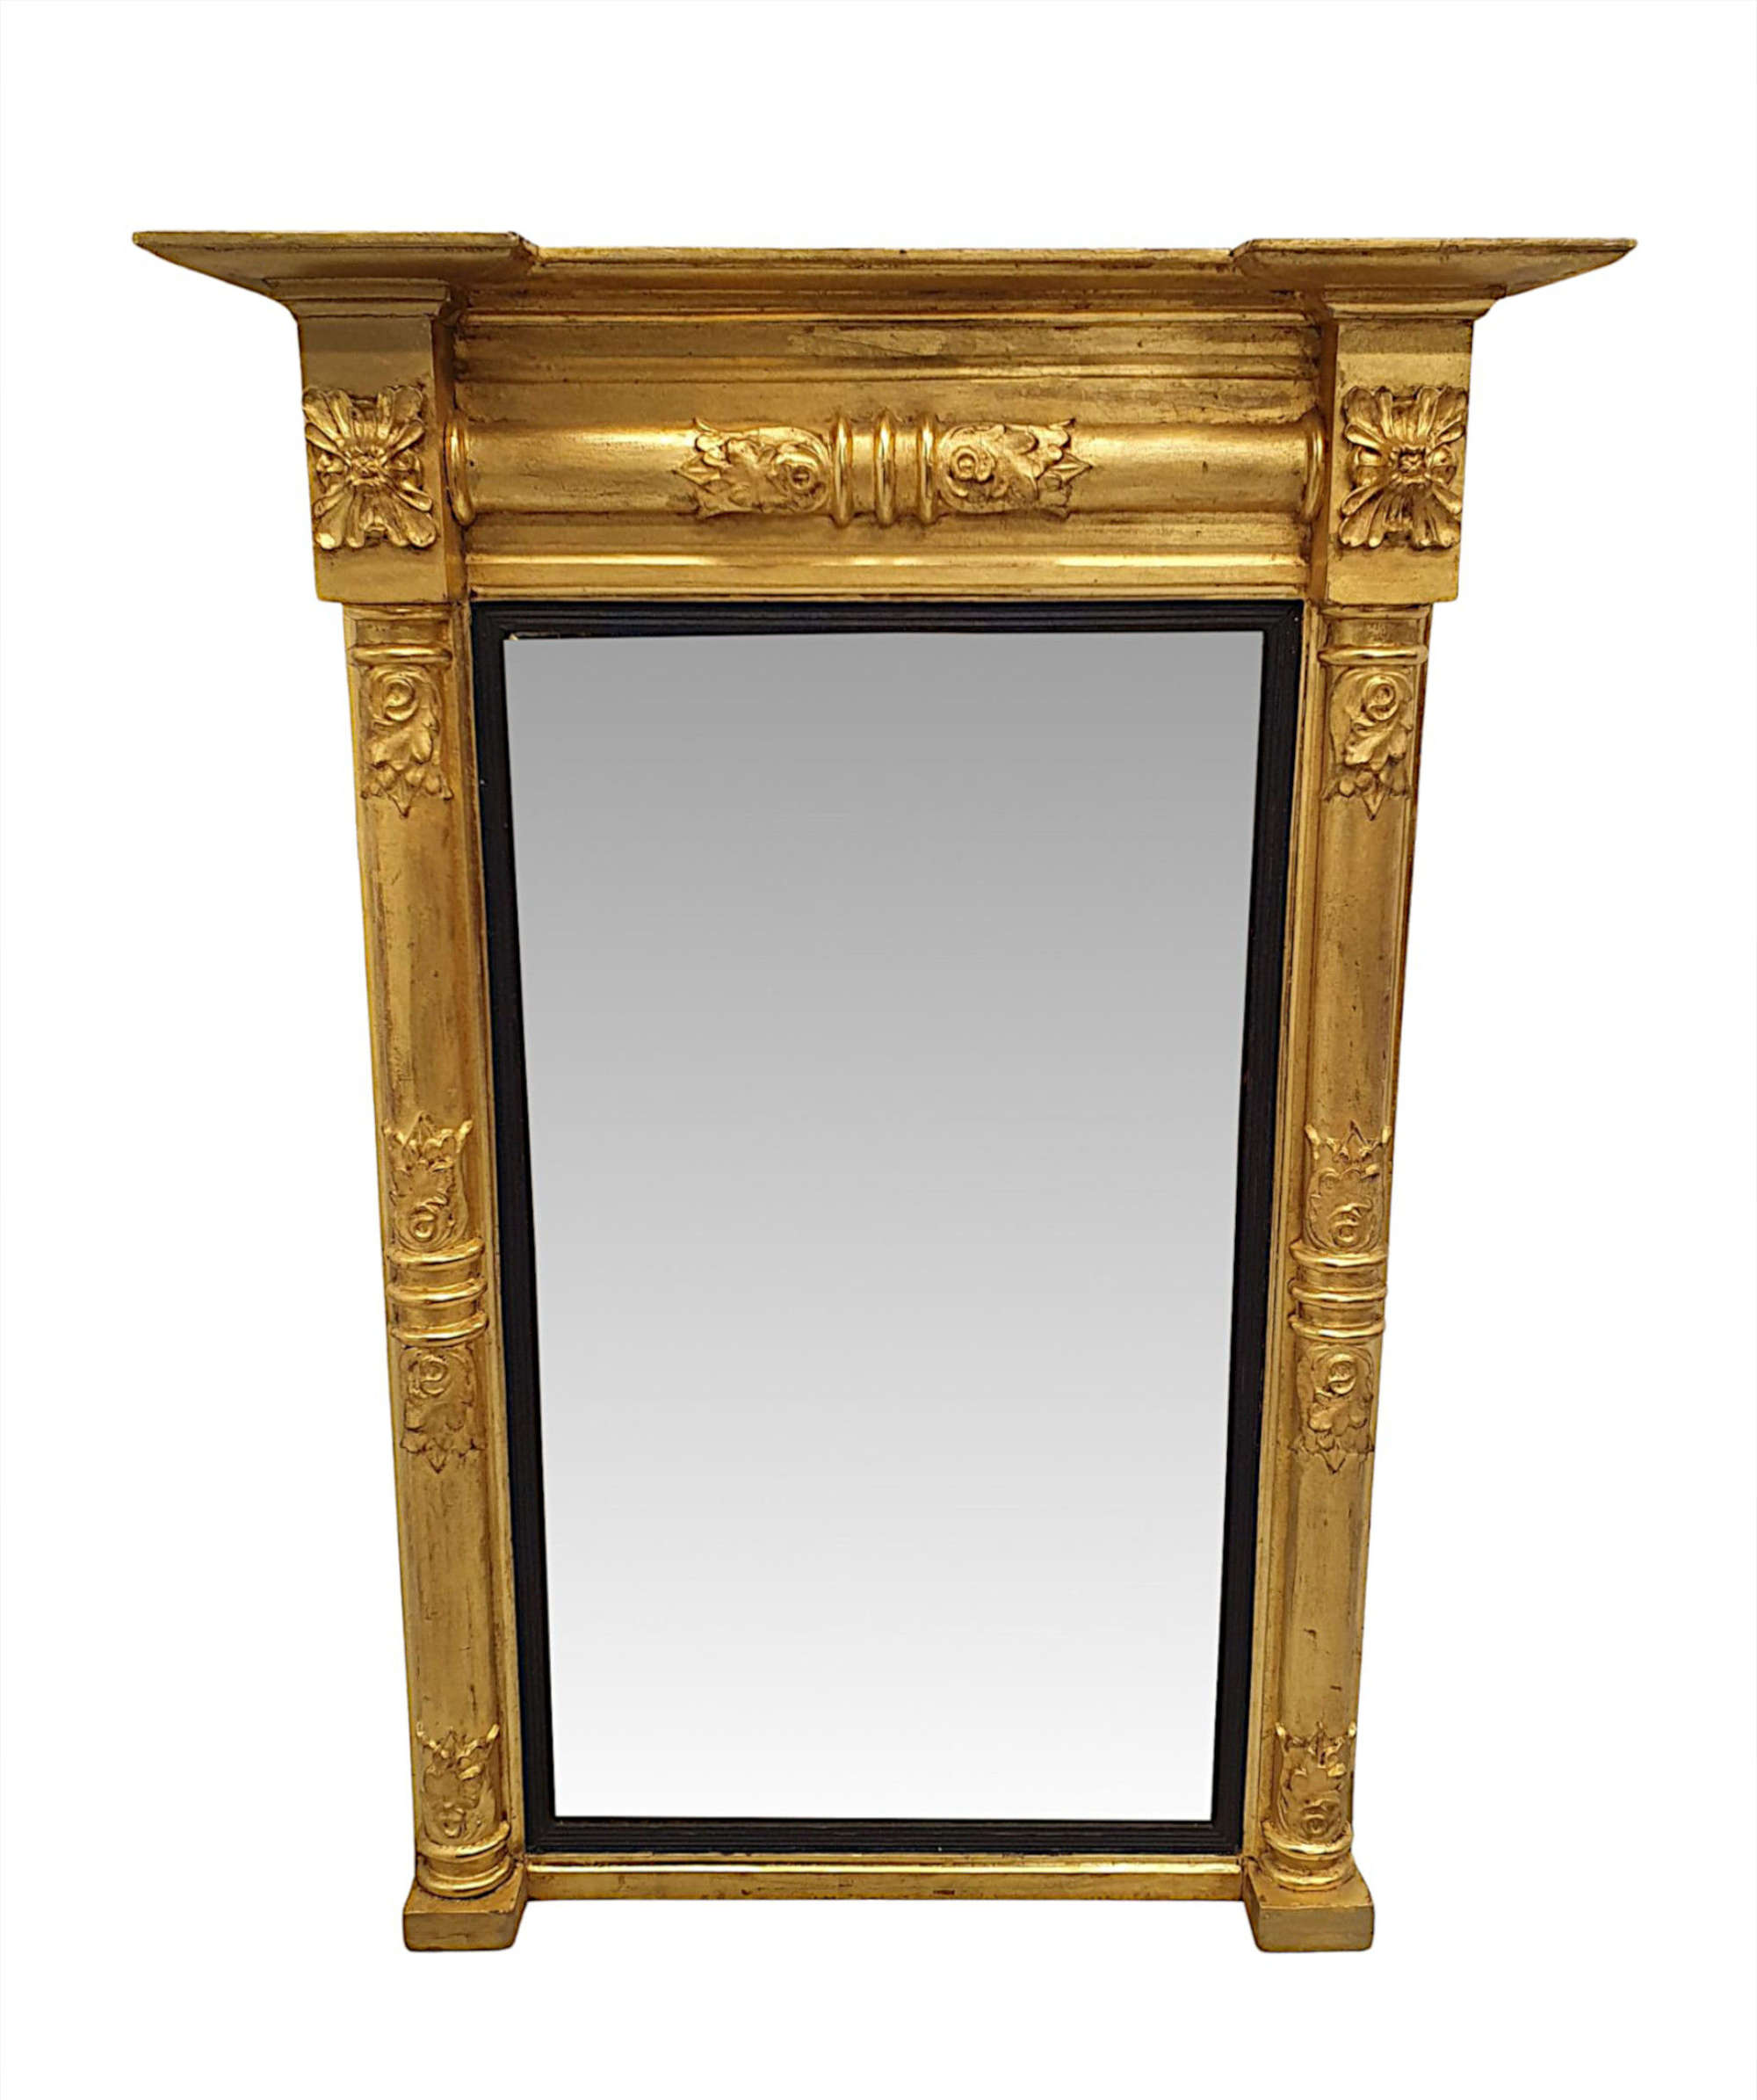 A Very Rare Early 19th Century William Iv Giltwood Antique Pier Mirror